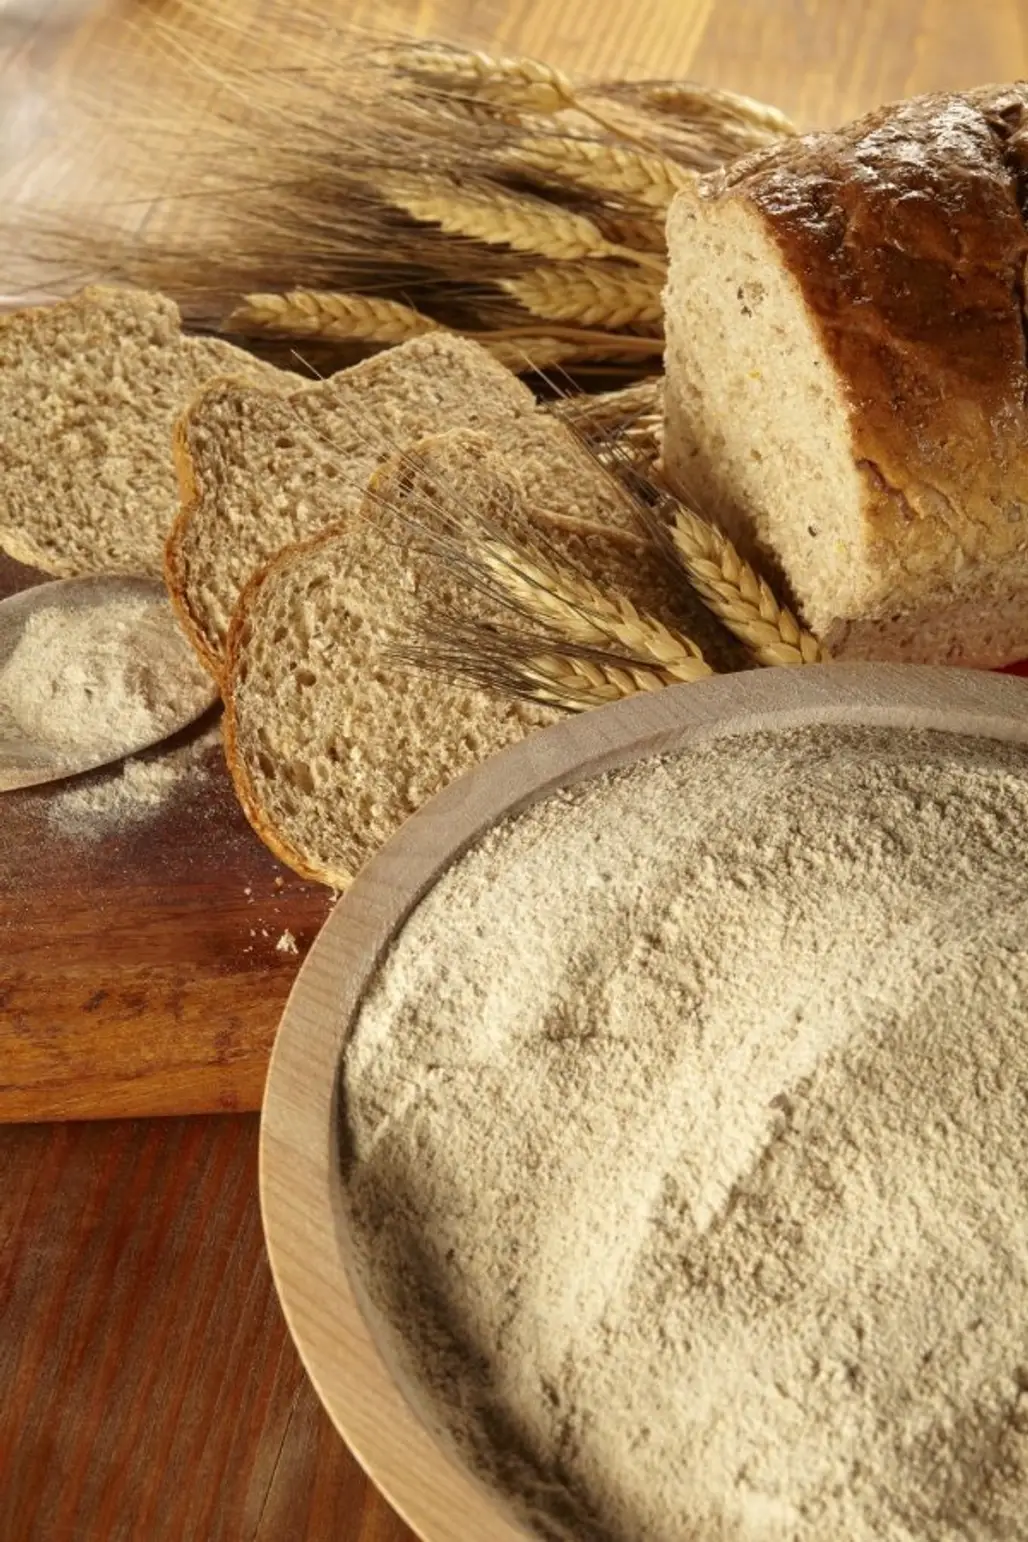 Use Whole Wheat Products Instead of Refined Products